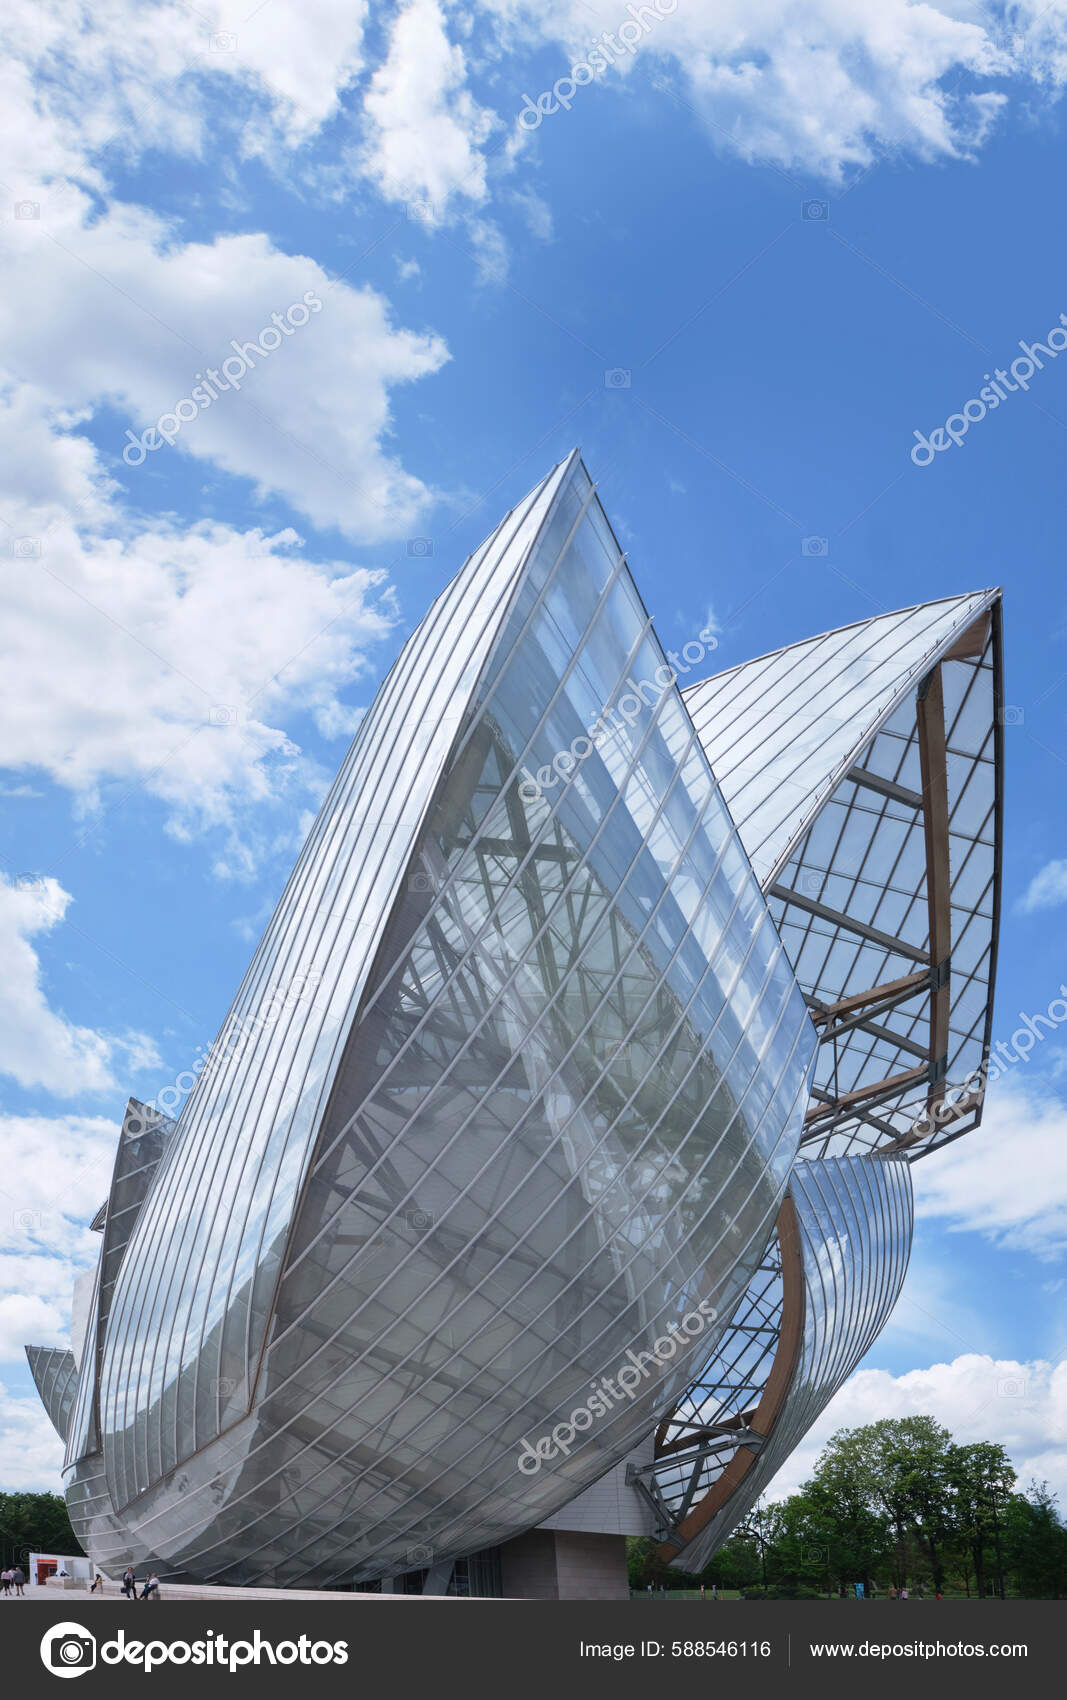 Louis Vuitton Foundation Designed by Frank Gehry Editorial Image